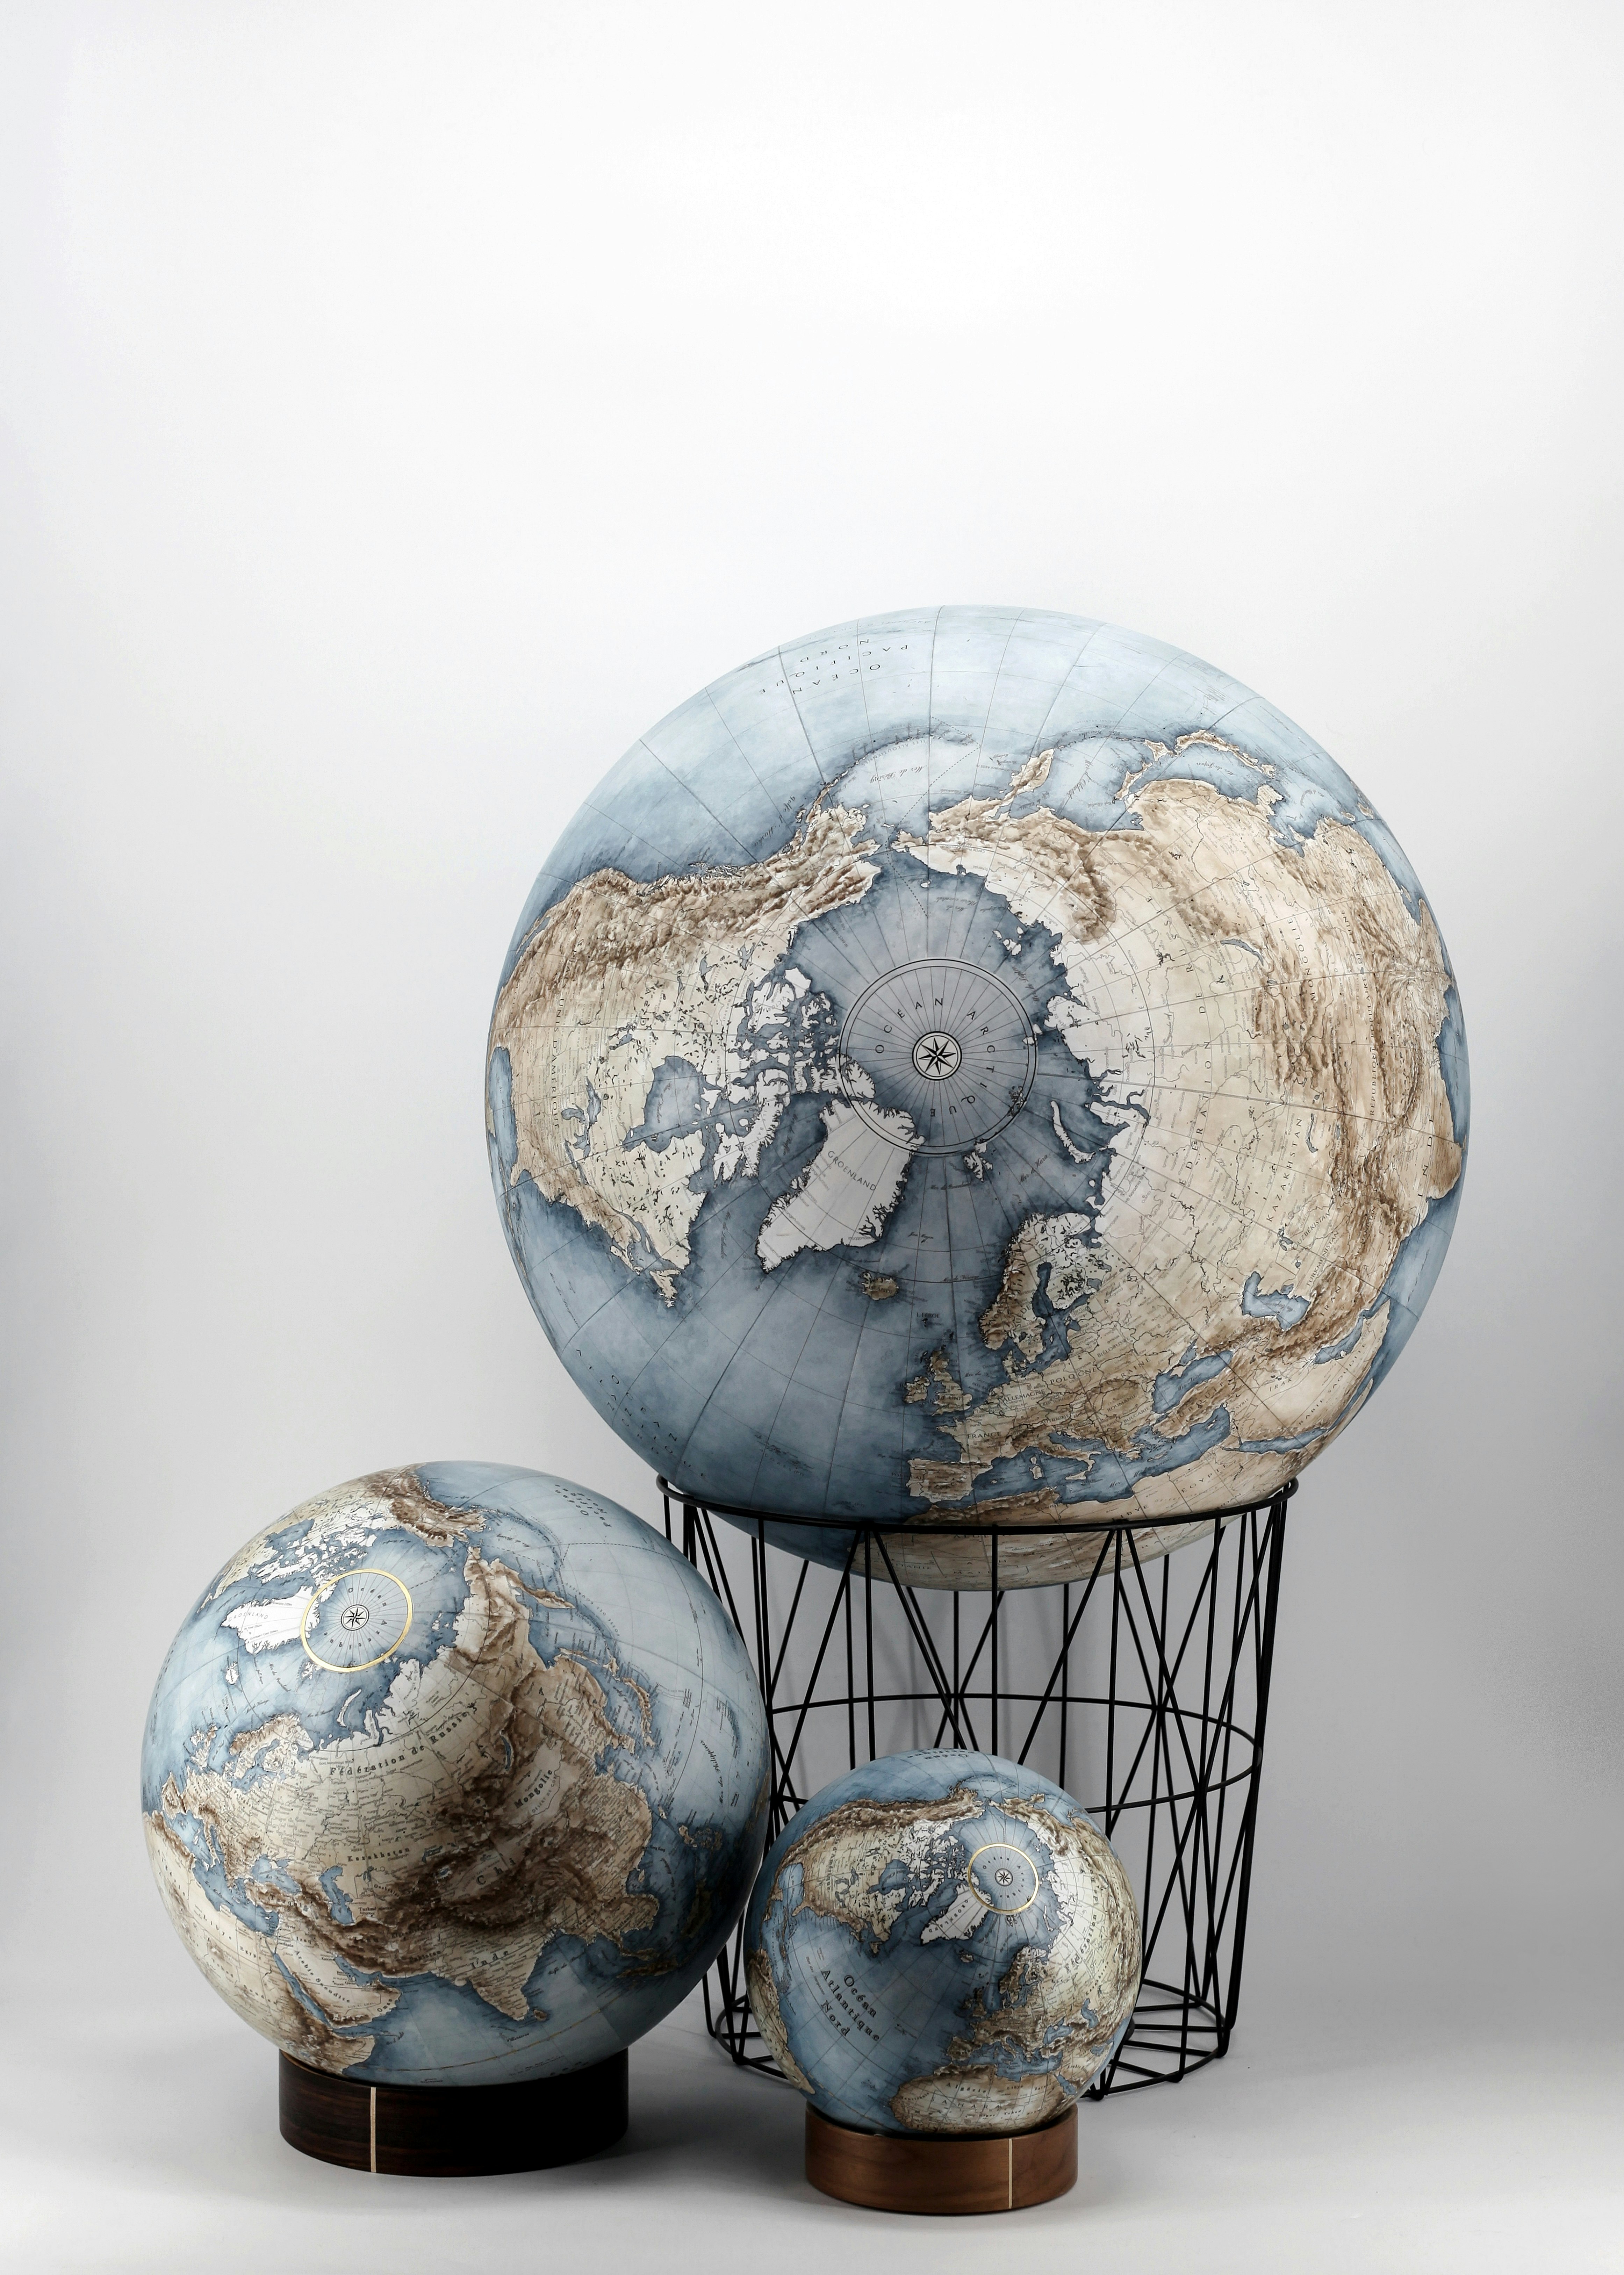 Three terrestrial globes over white background. Color and relief shading using watercolors.